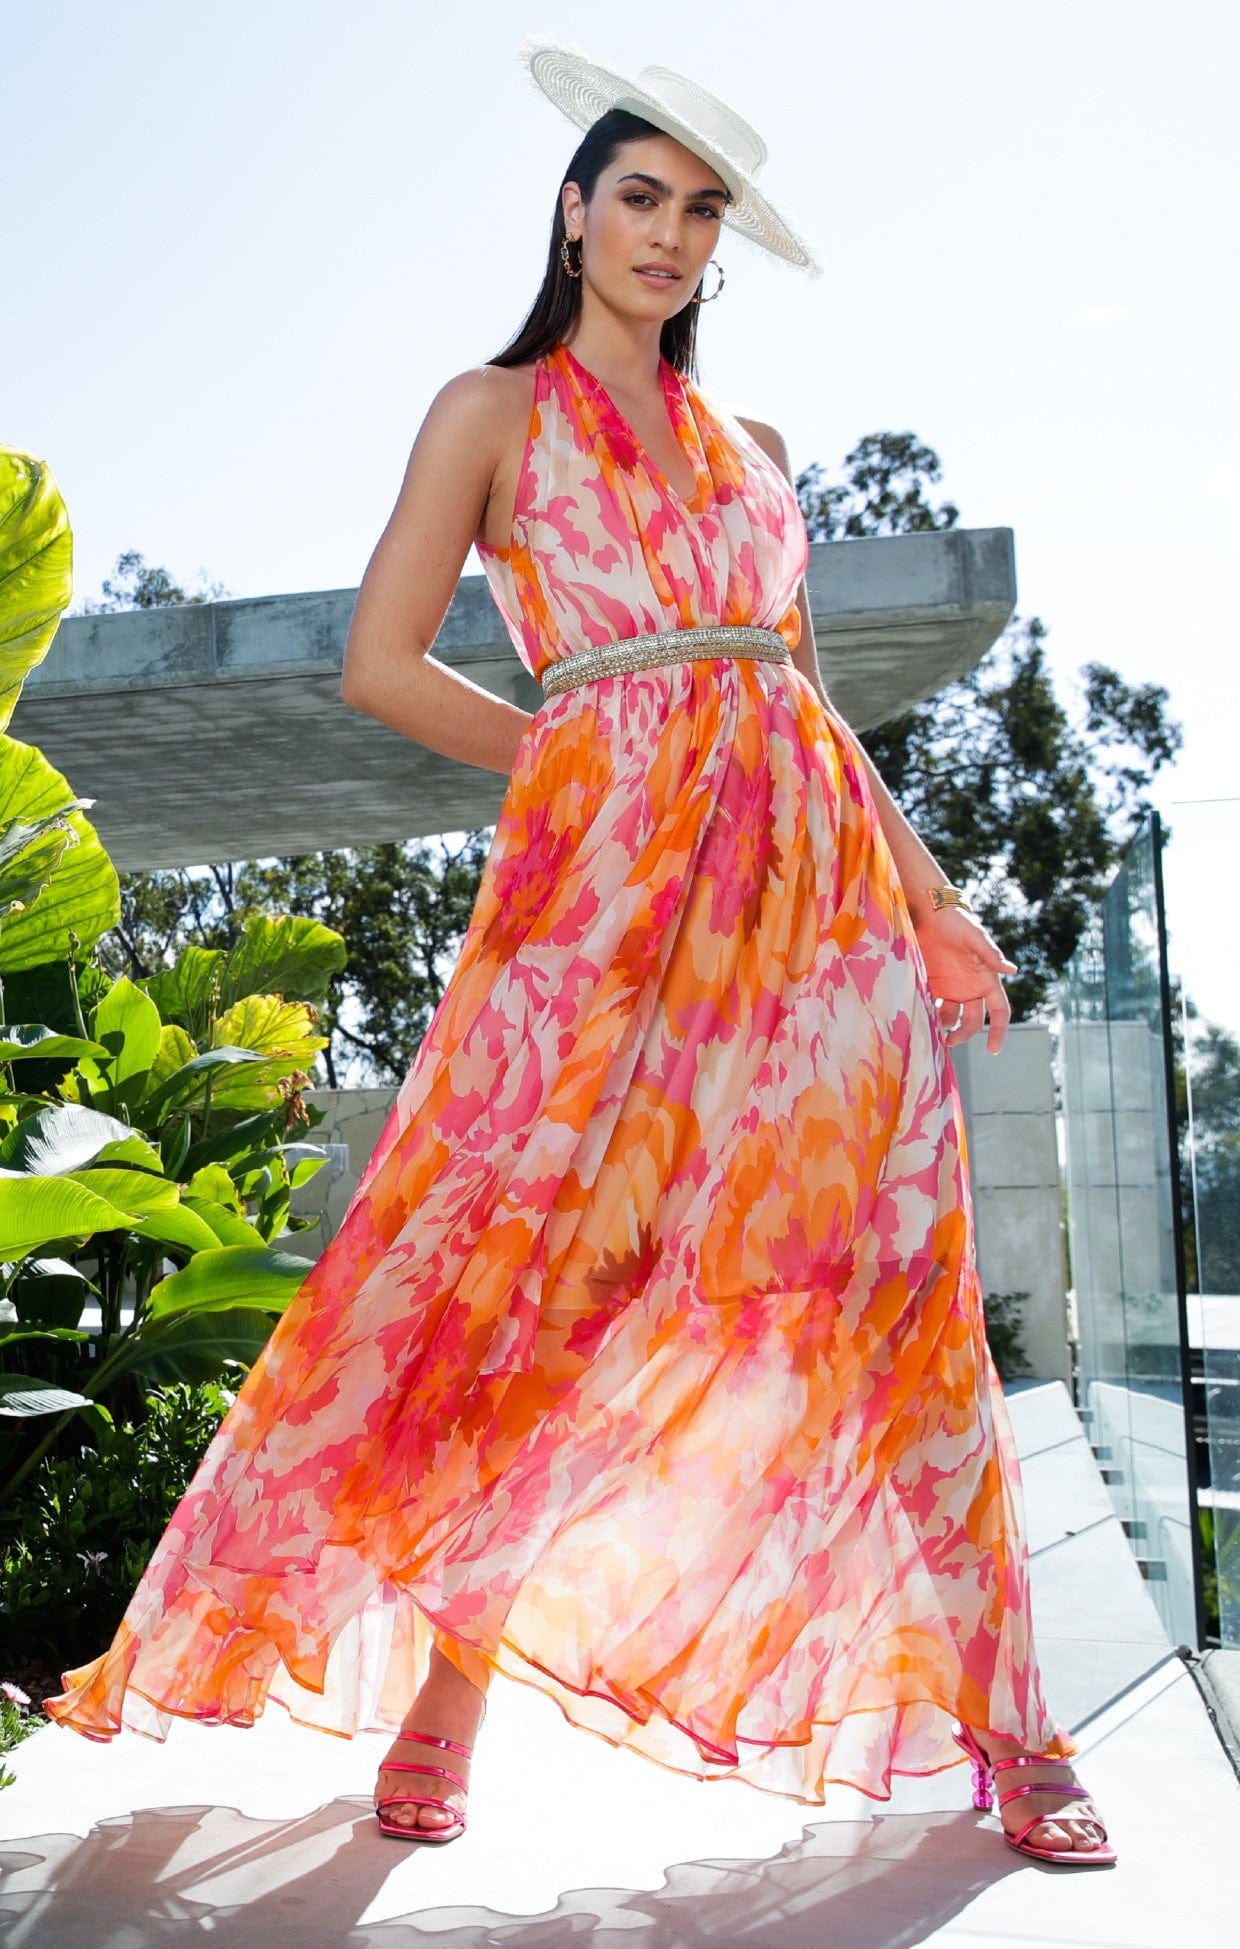 Dresses Events THE BILLIONAIRES WIFE MAXI IN PINK ORANGE FLOWER